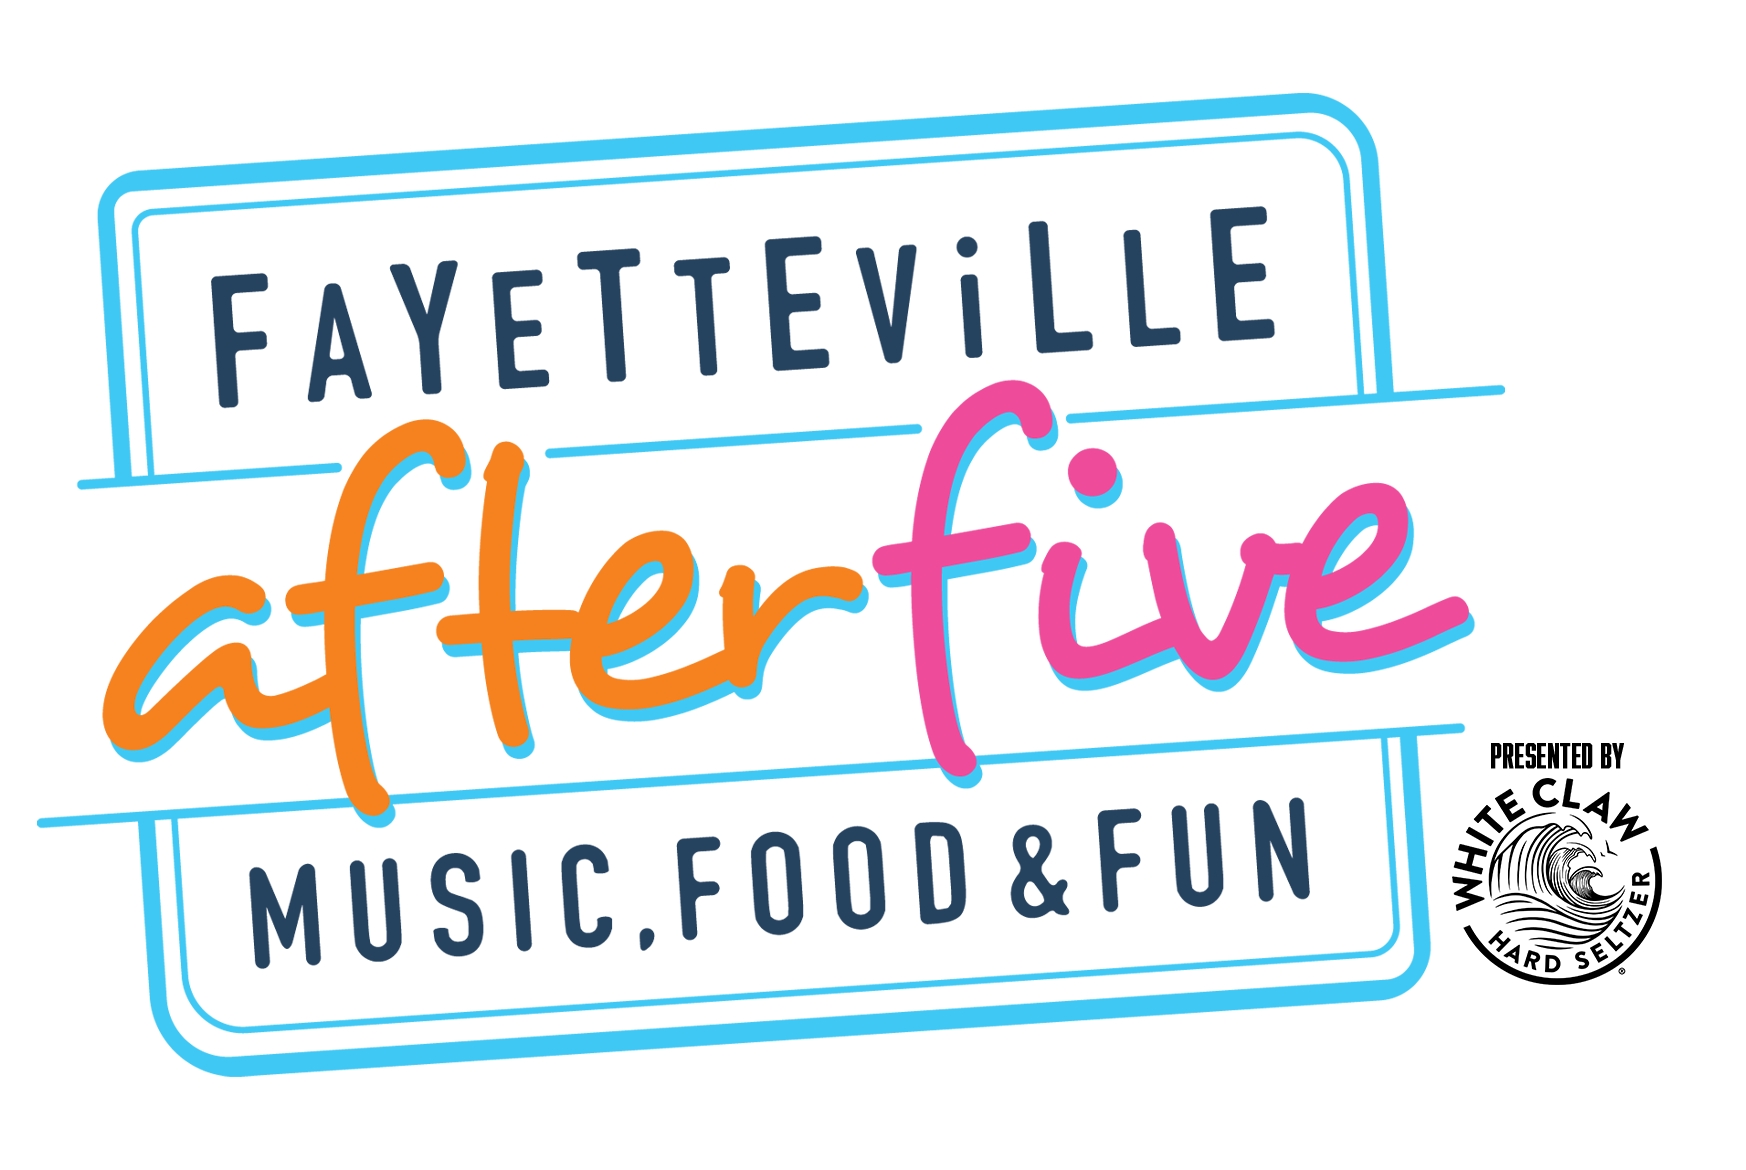 Fayetteville After 5 cover image